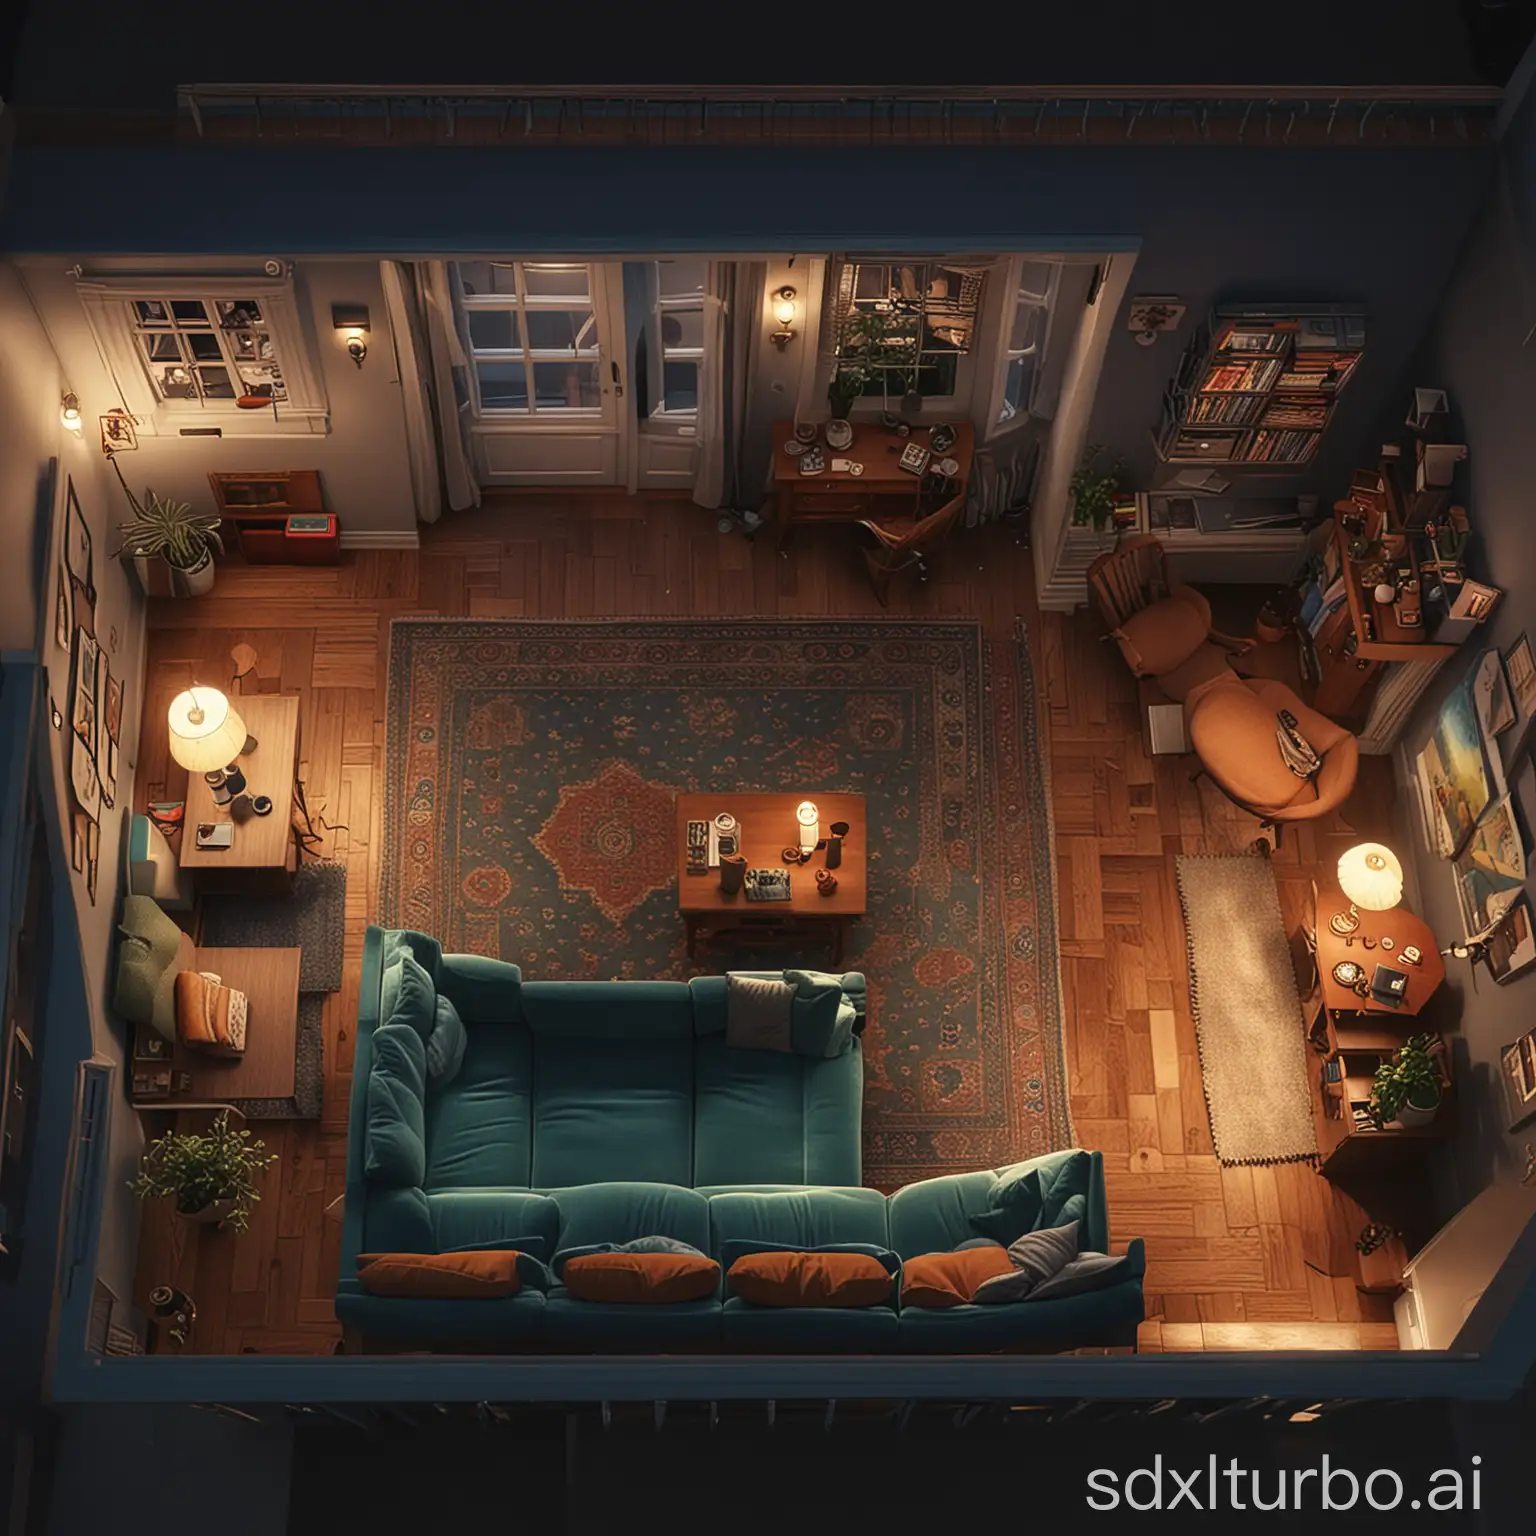 Nighttime-Living-Room-Scene-with-Couch-and-Entrance-Door